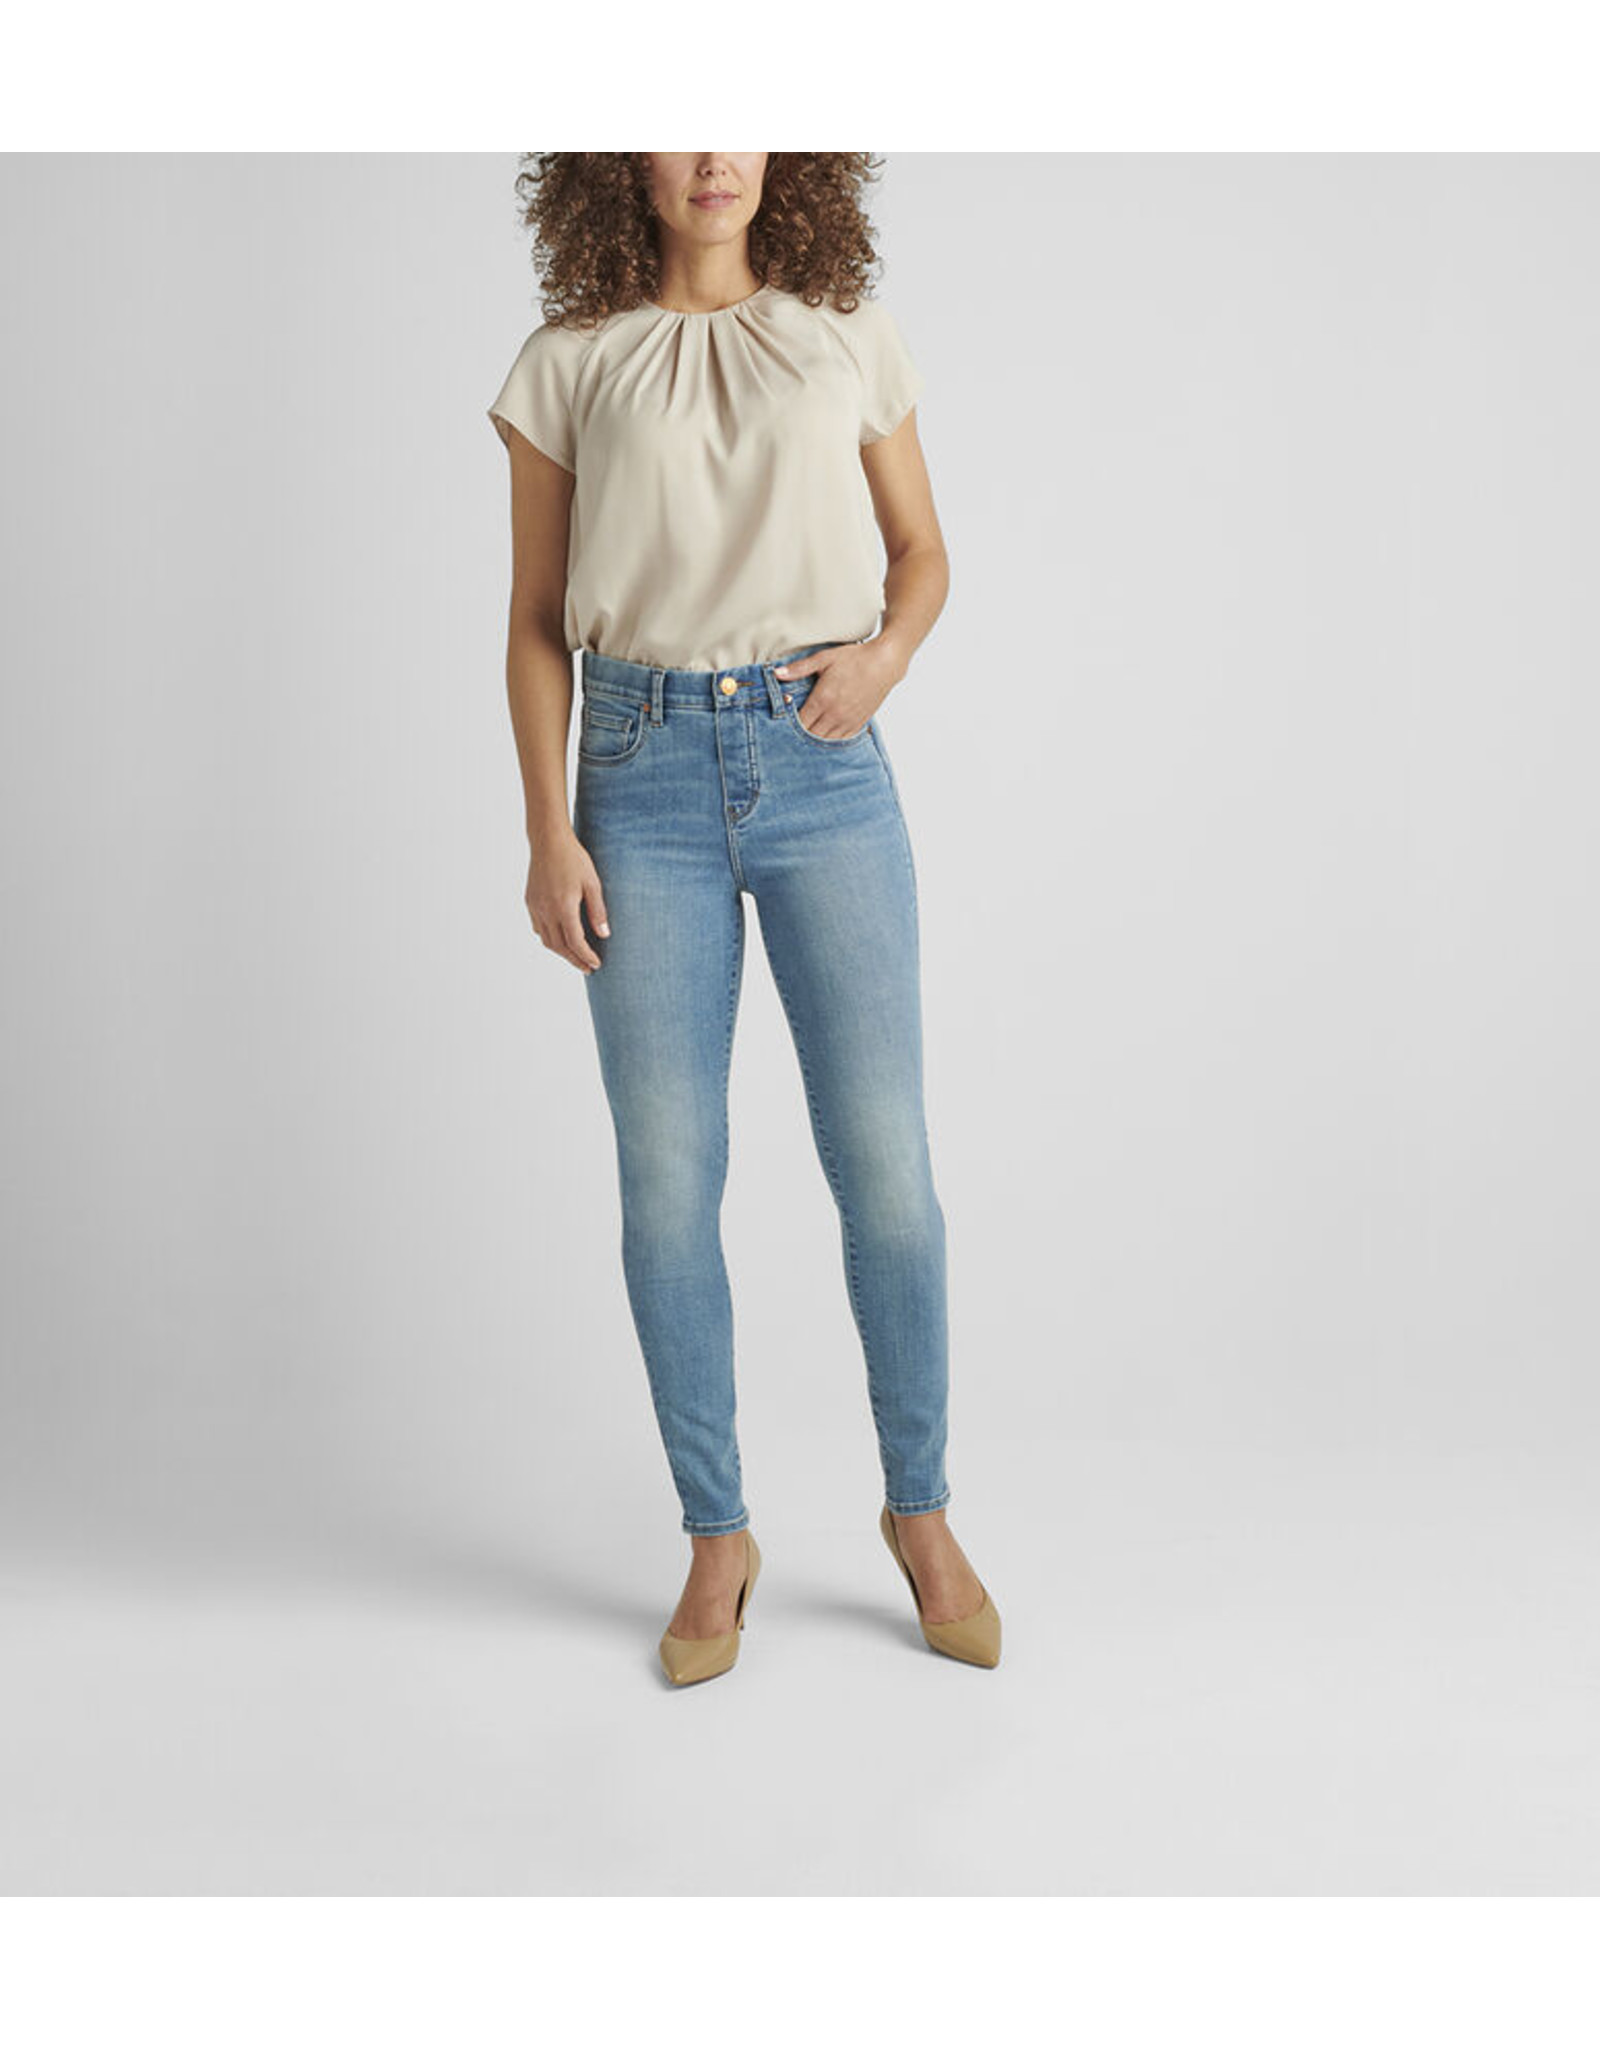 Jag Jeans Valentina High Rise Skinny Pull On Jeans